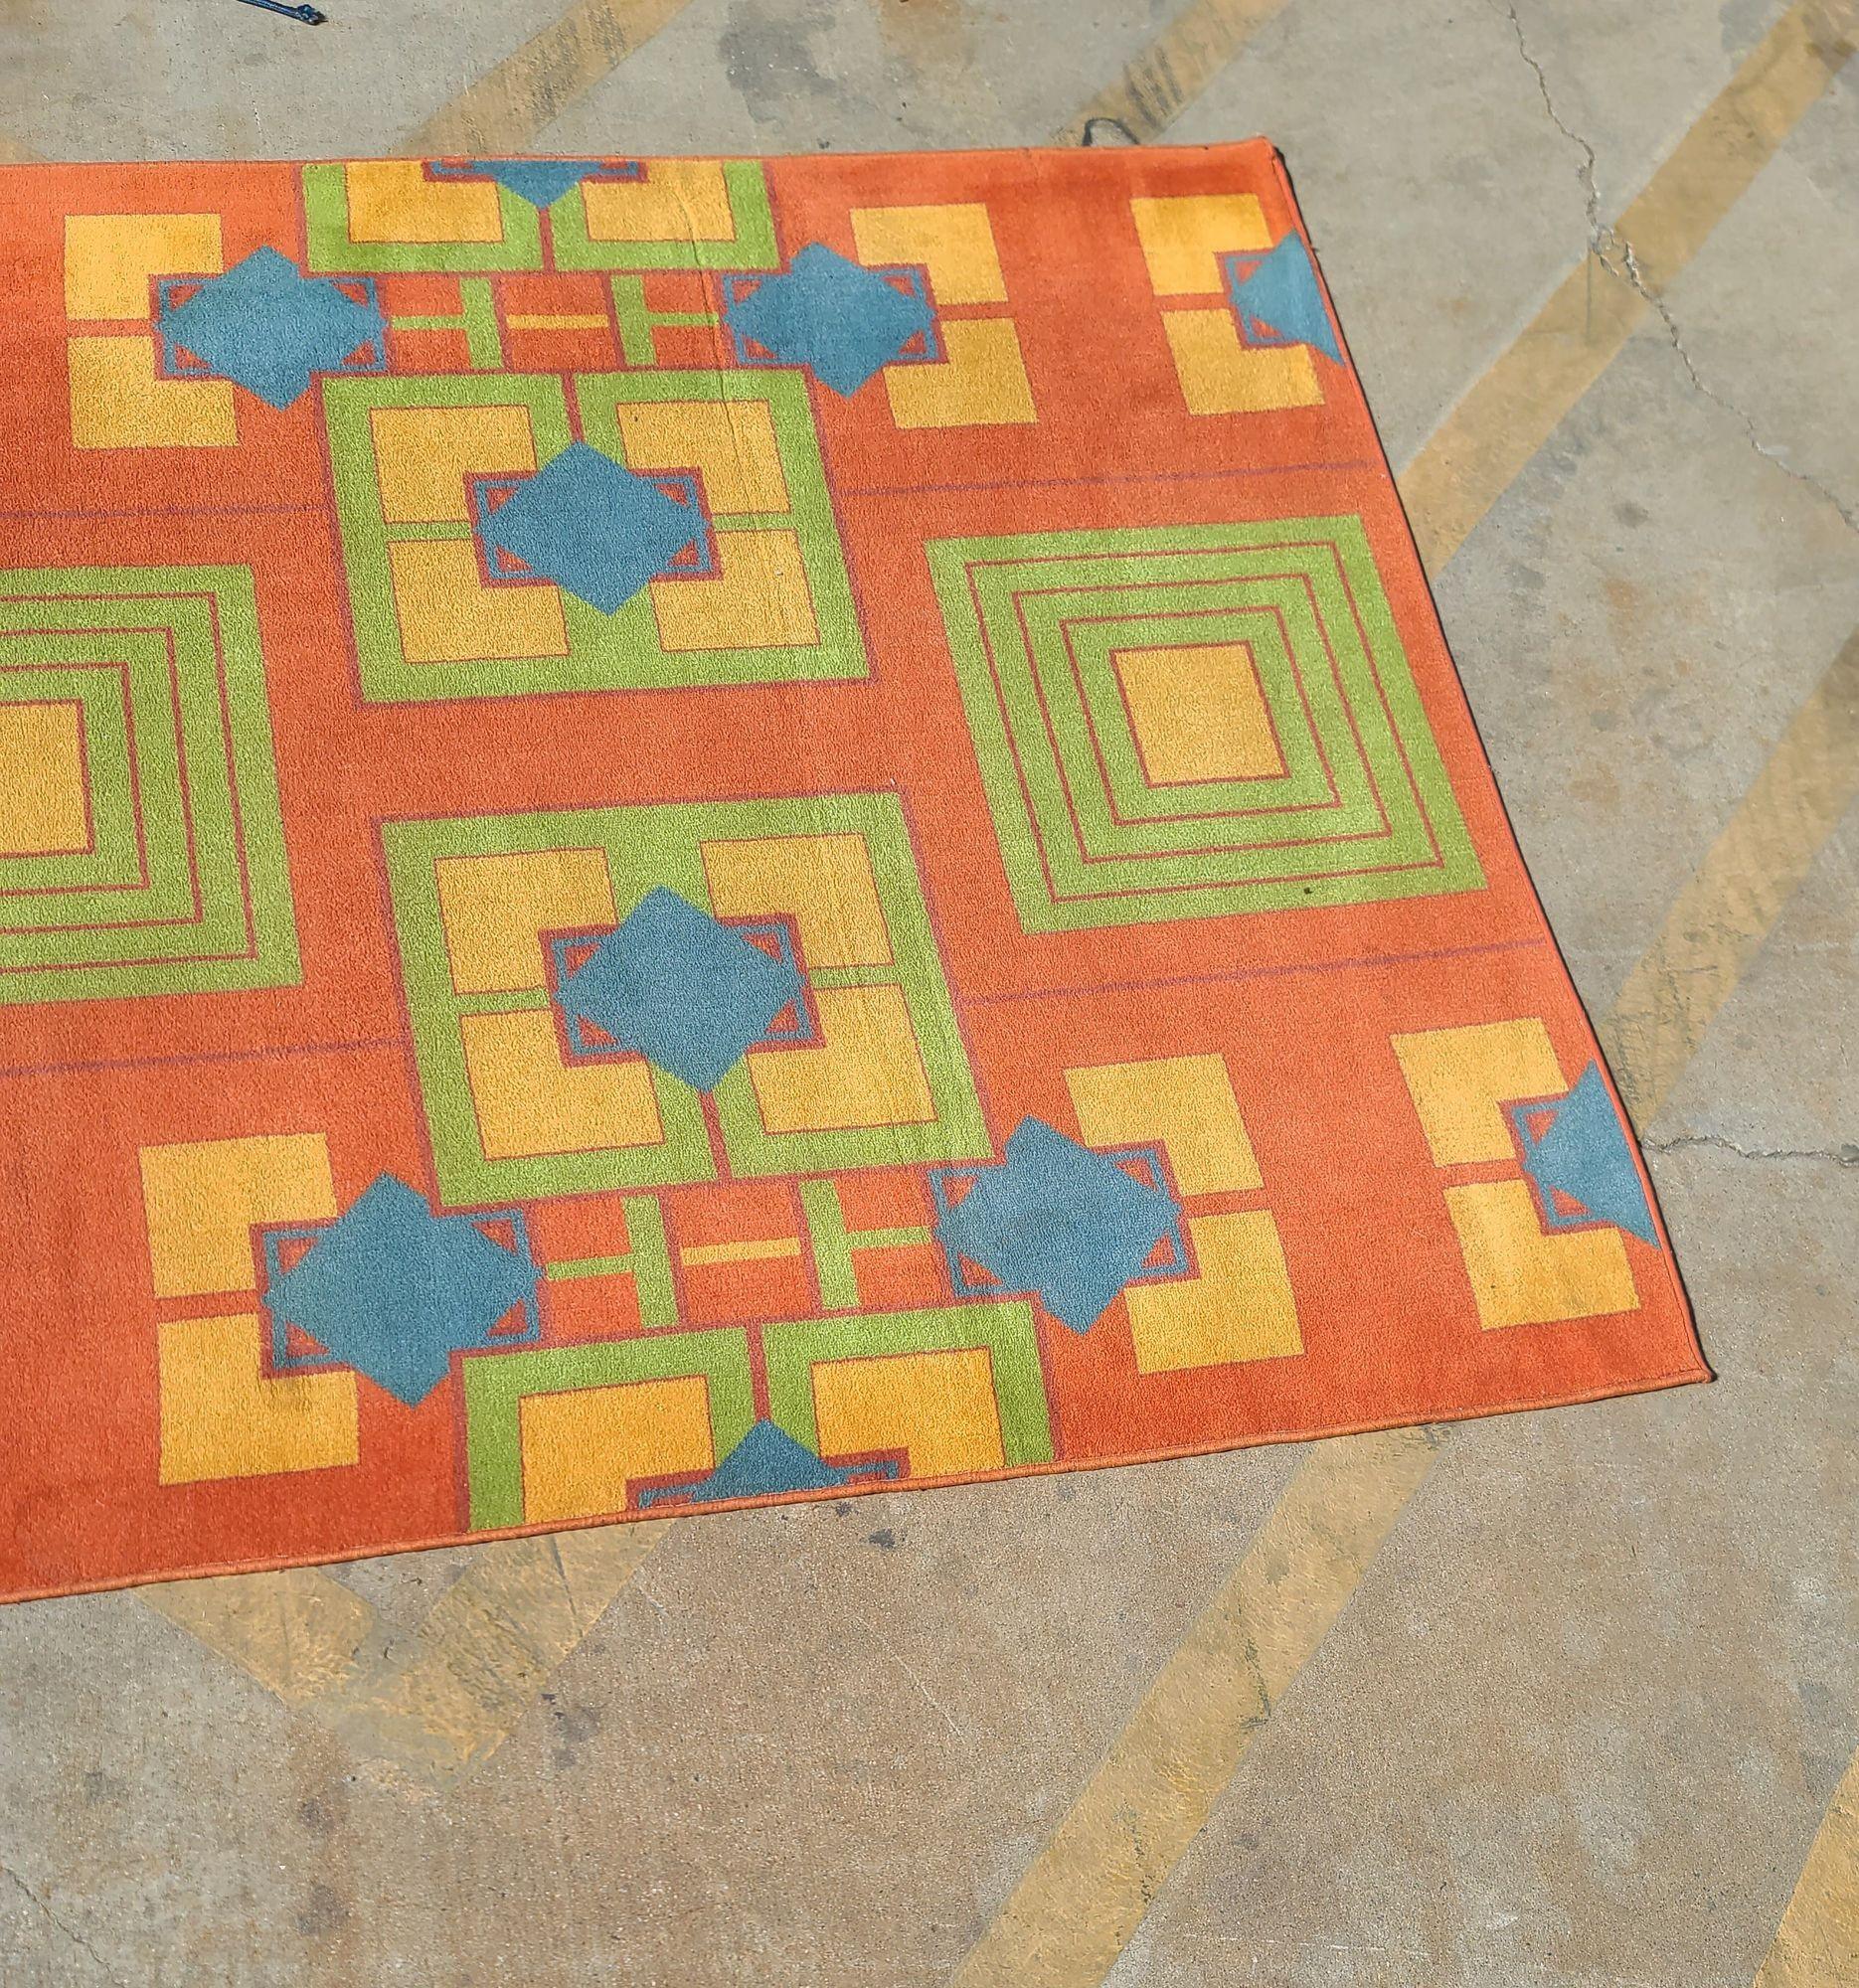 Original 6.4' X 13.7' Art Deco Revival Area Rug From the Arizona Biltmore In Good Condition For Sale In Van Nuys, CA